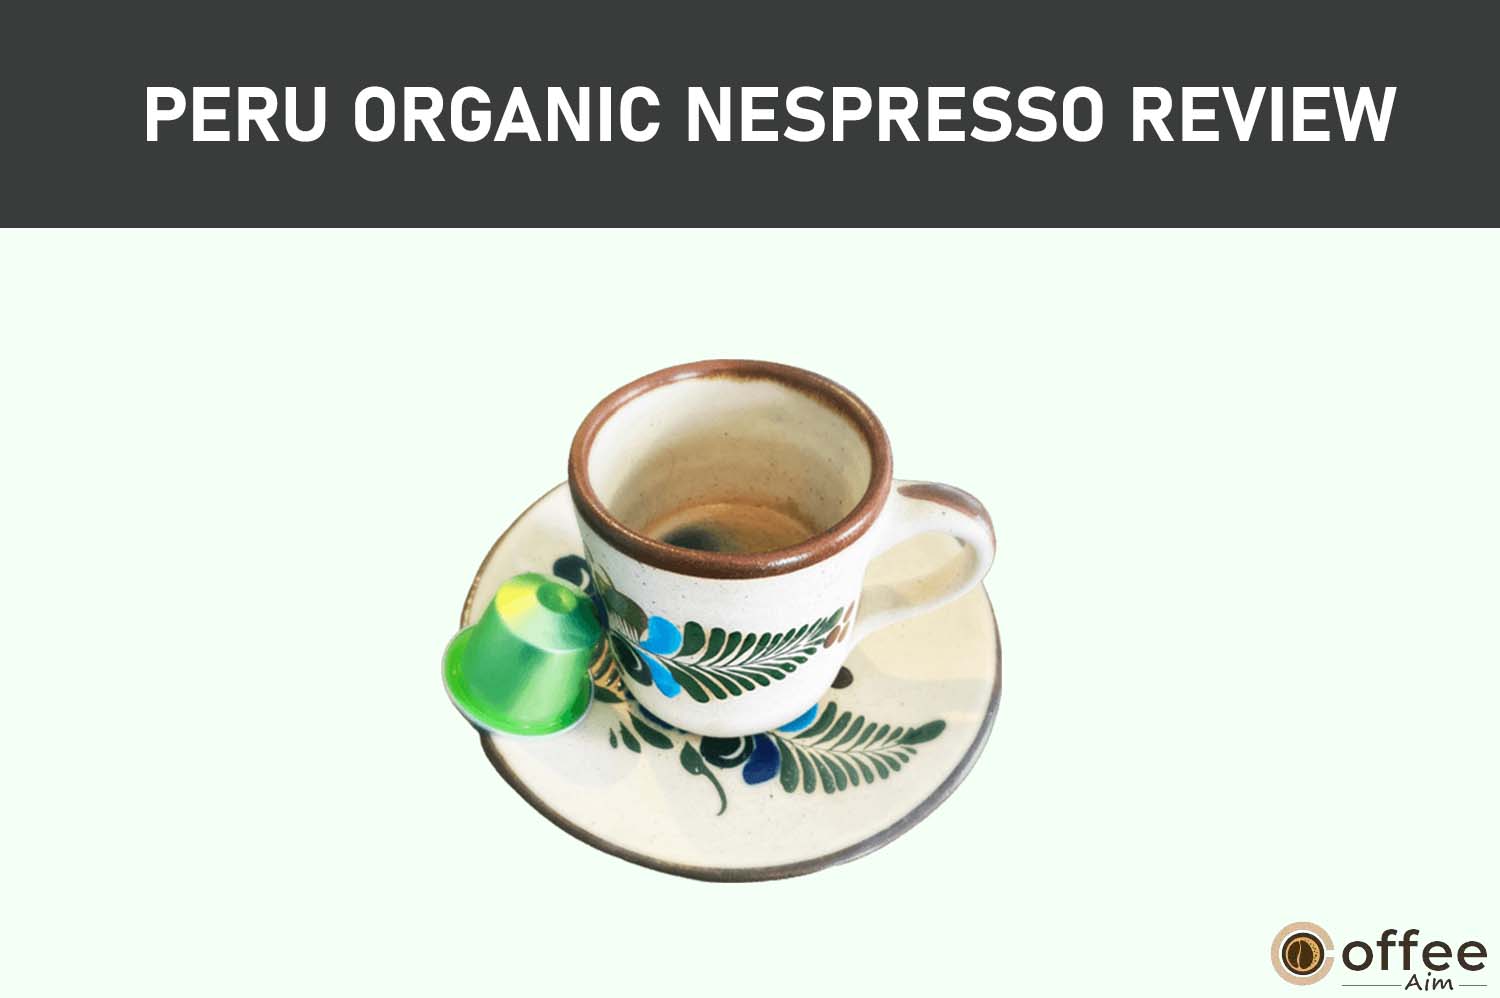 featured image for the article "Peru Organic Nespresso Review"